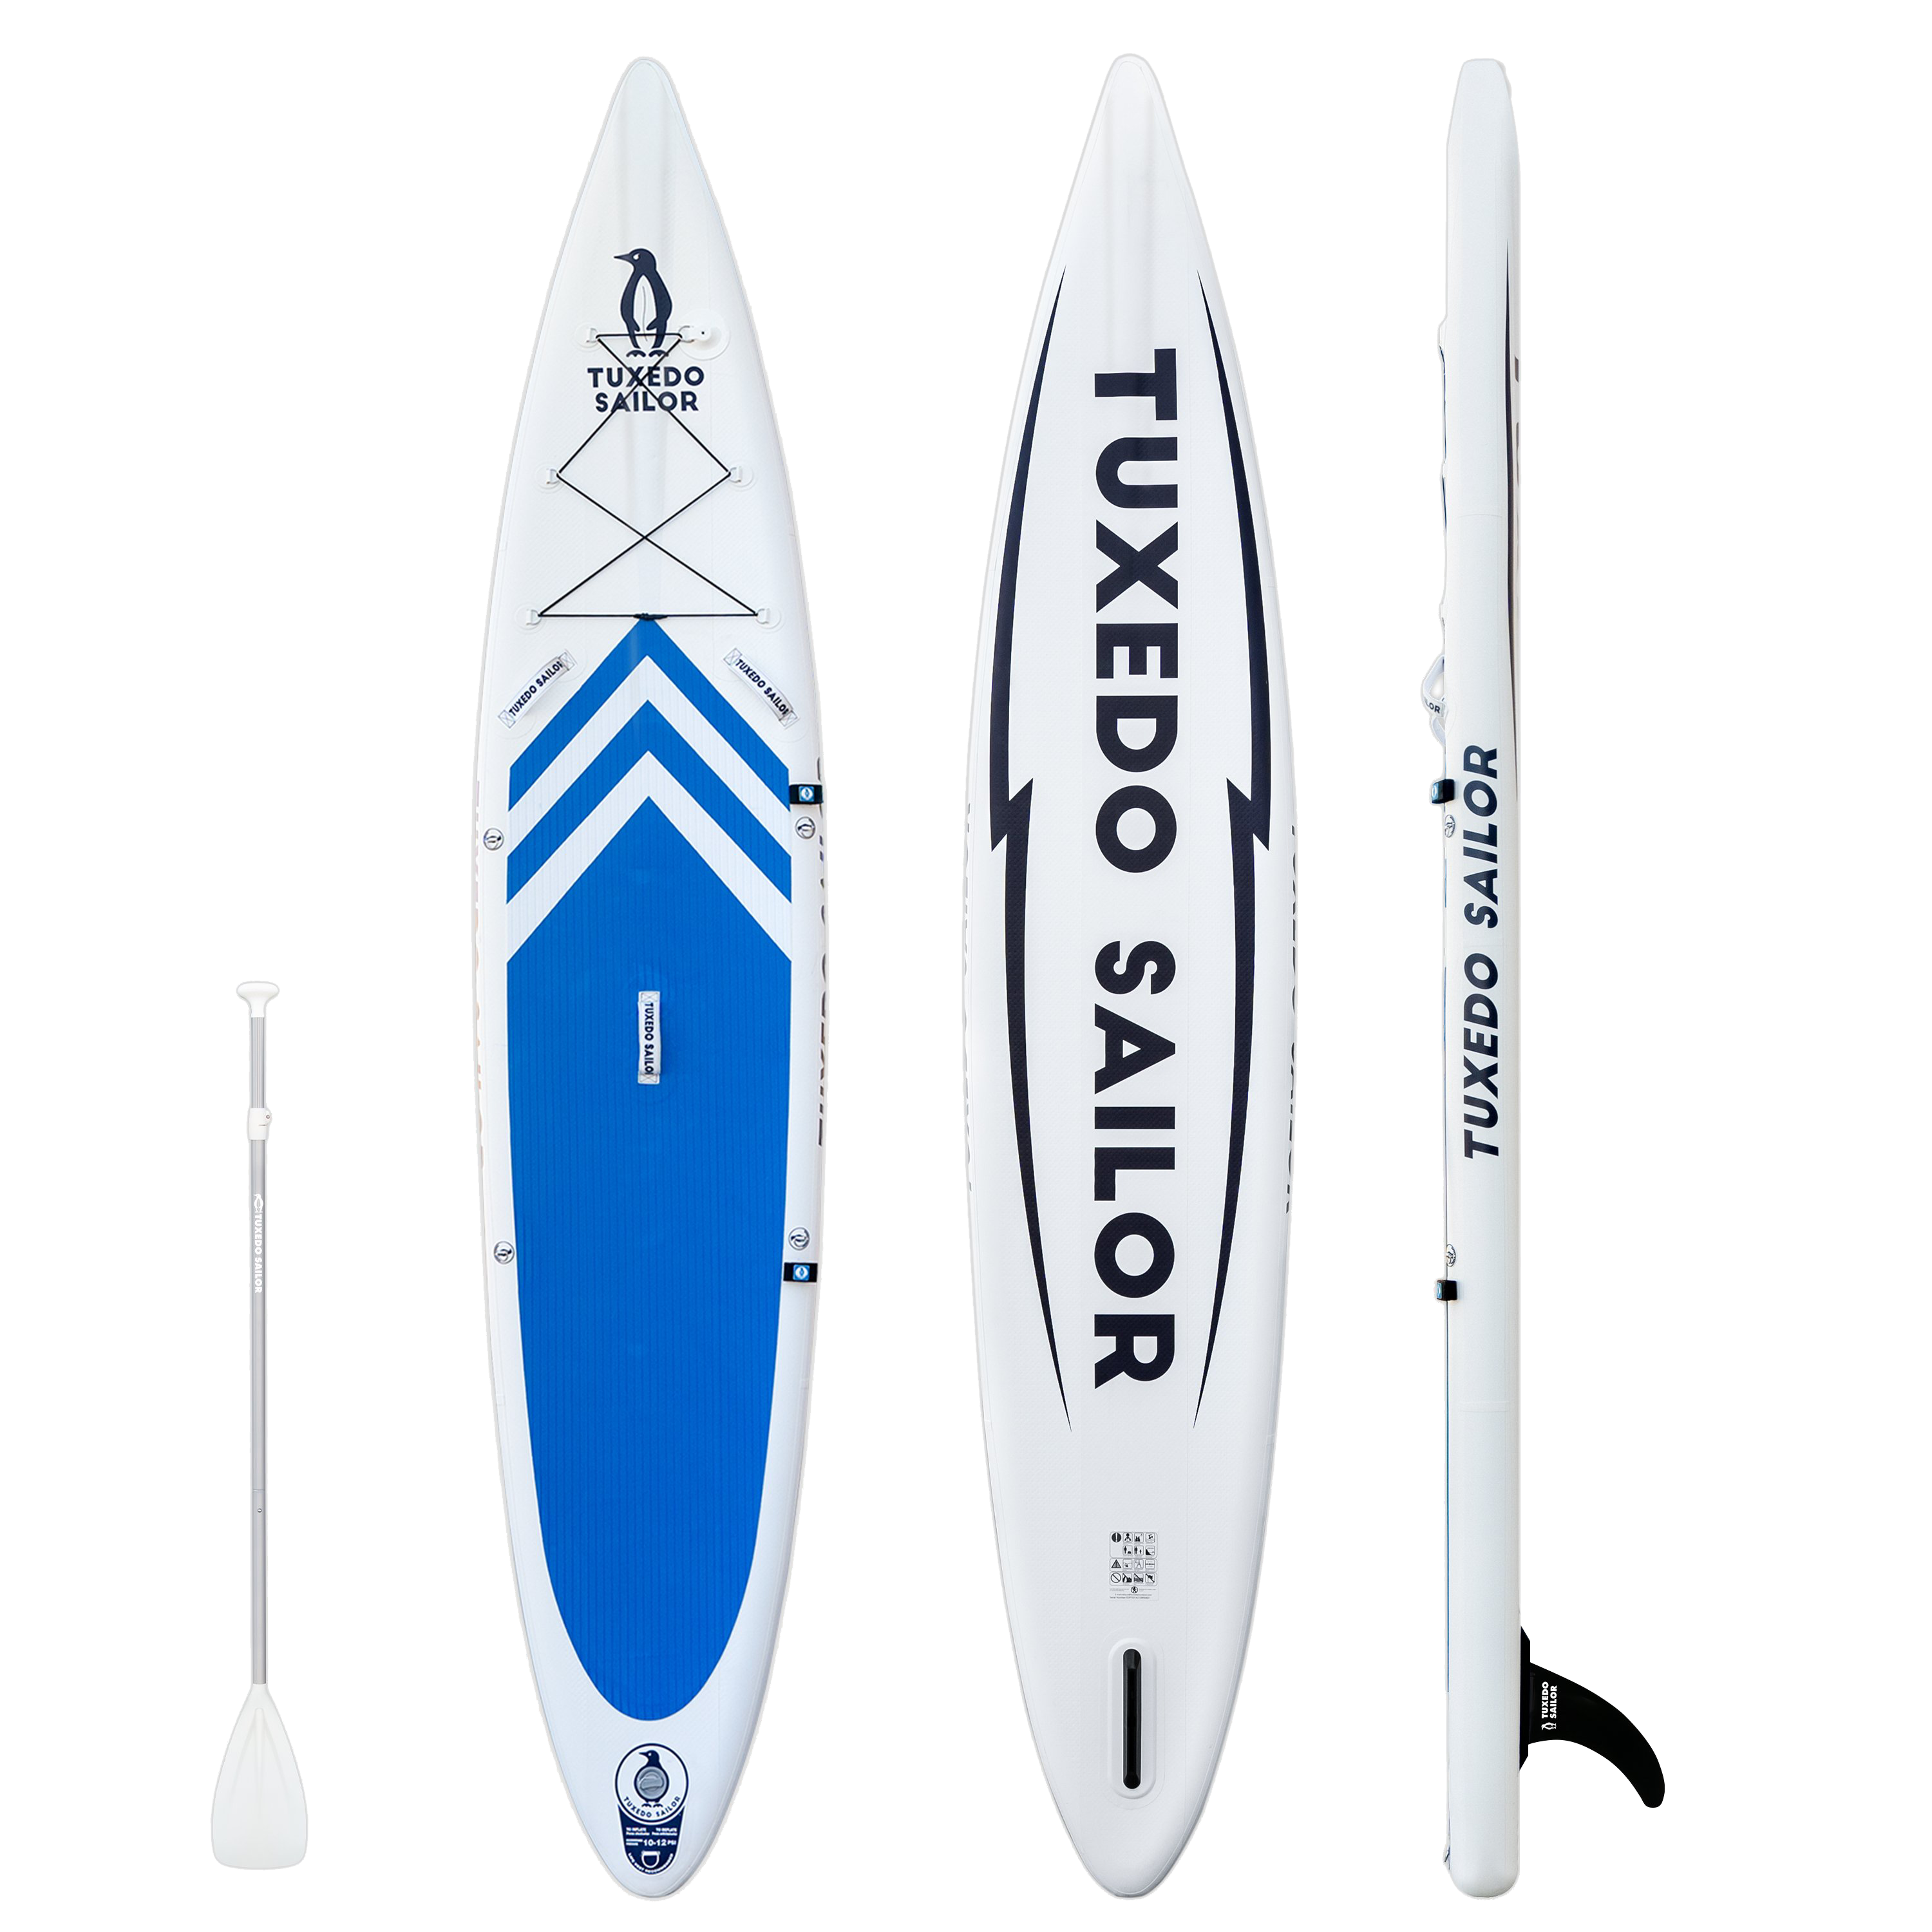 Tuxedo Sailor Inflatable Stand Up Paddle Board iSUP EPIC 12' Unboxing  Review 